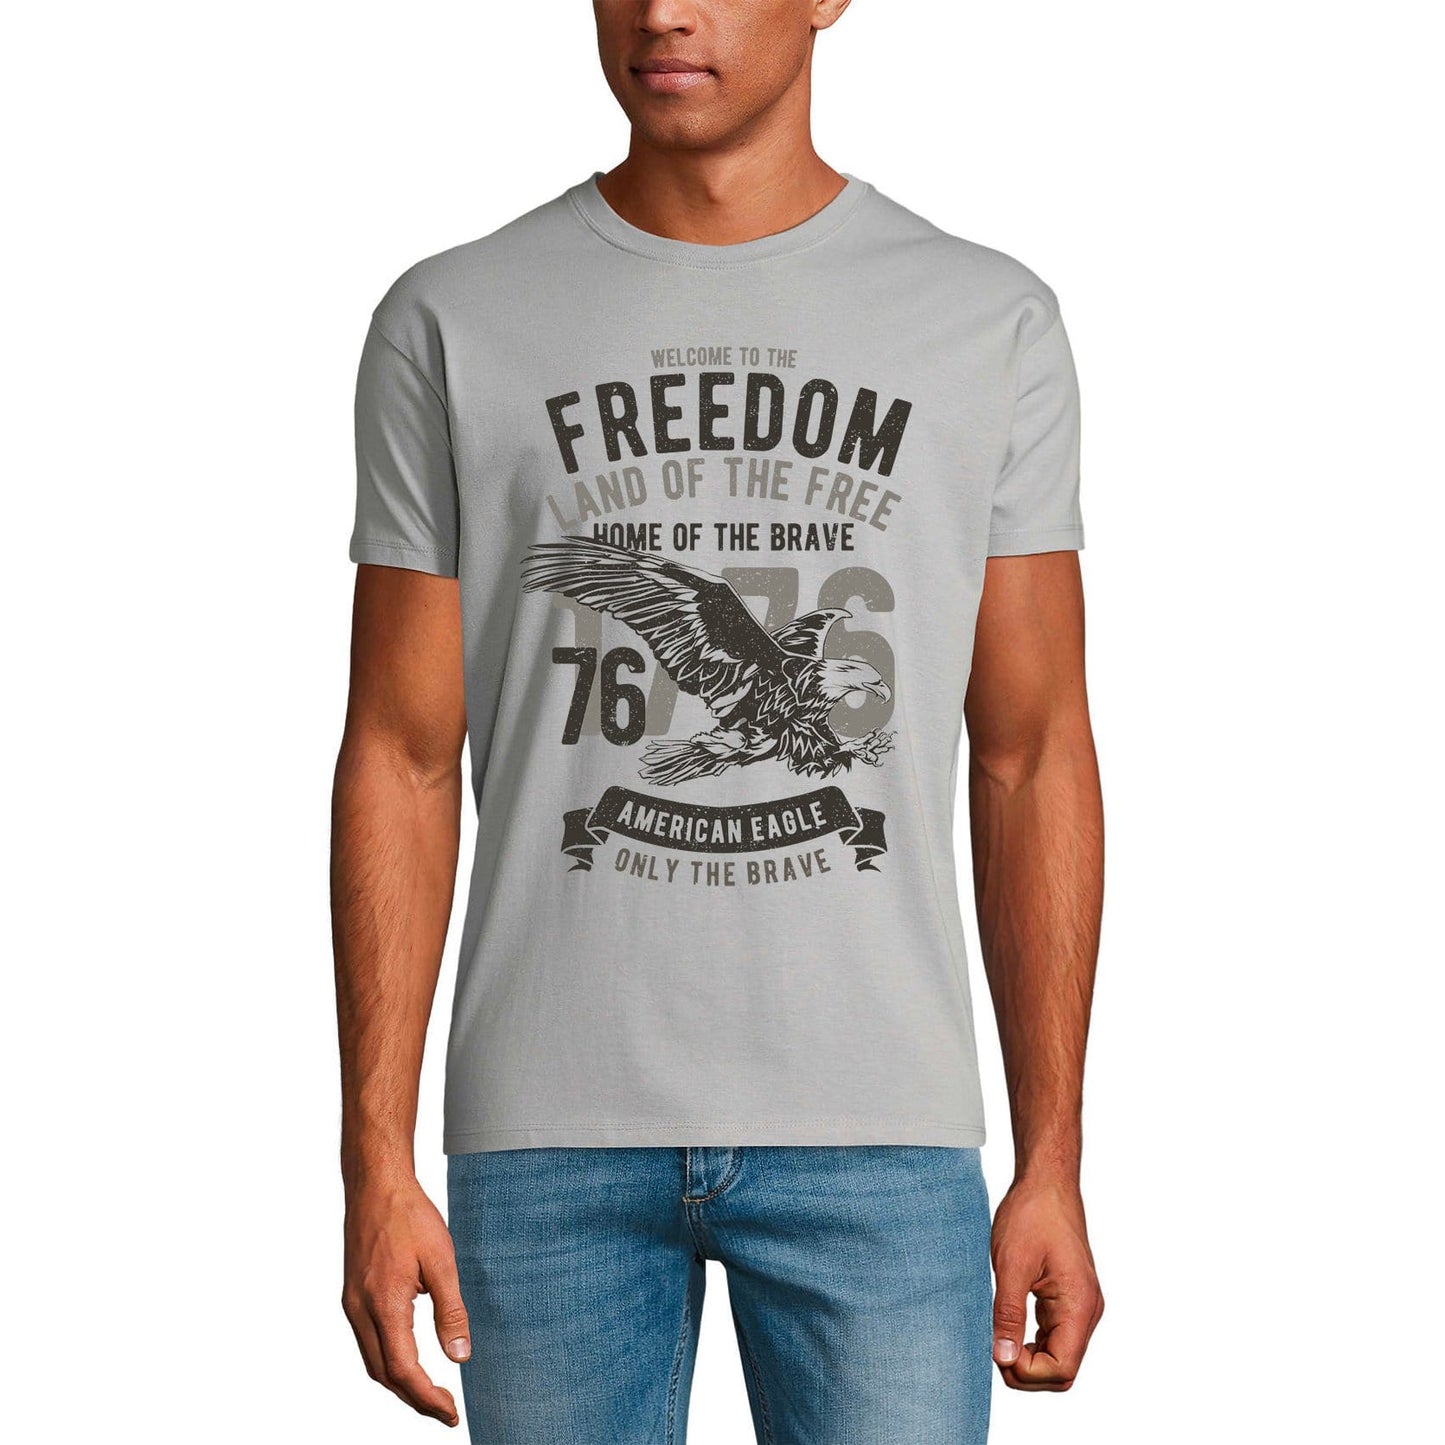 ULTRABASIC Men's T-Shirt Welcome to the Freedom - Land of the Free - Home of the Brave - US Patriotic Eagle Tee Shirt